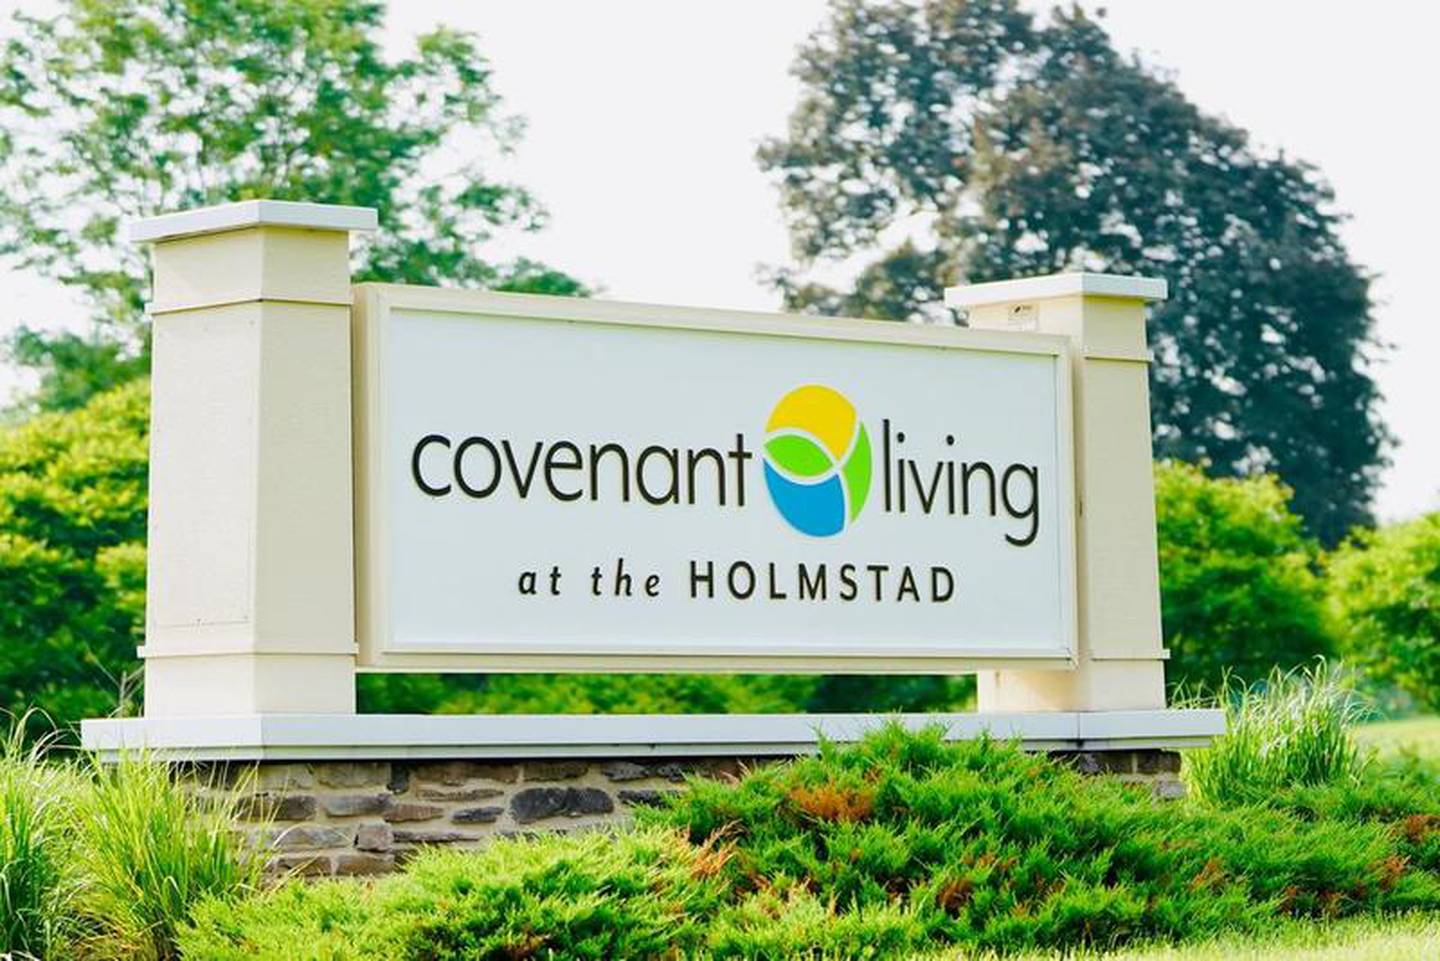 The investigation continues into the source of Legionella bacteria that has sickened 12 residents of Covenant Living at the Holmstad.